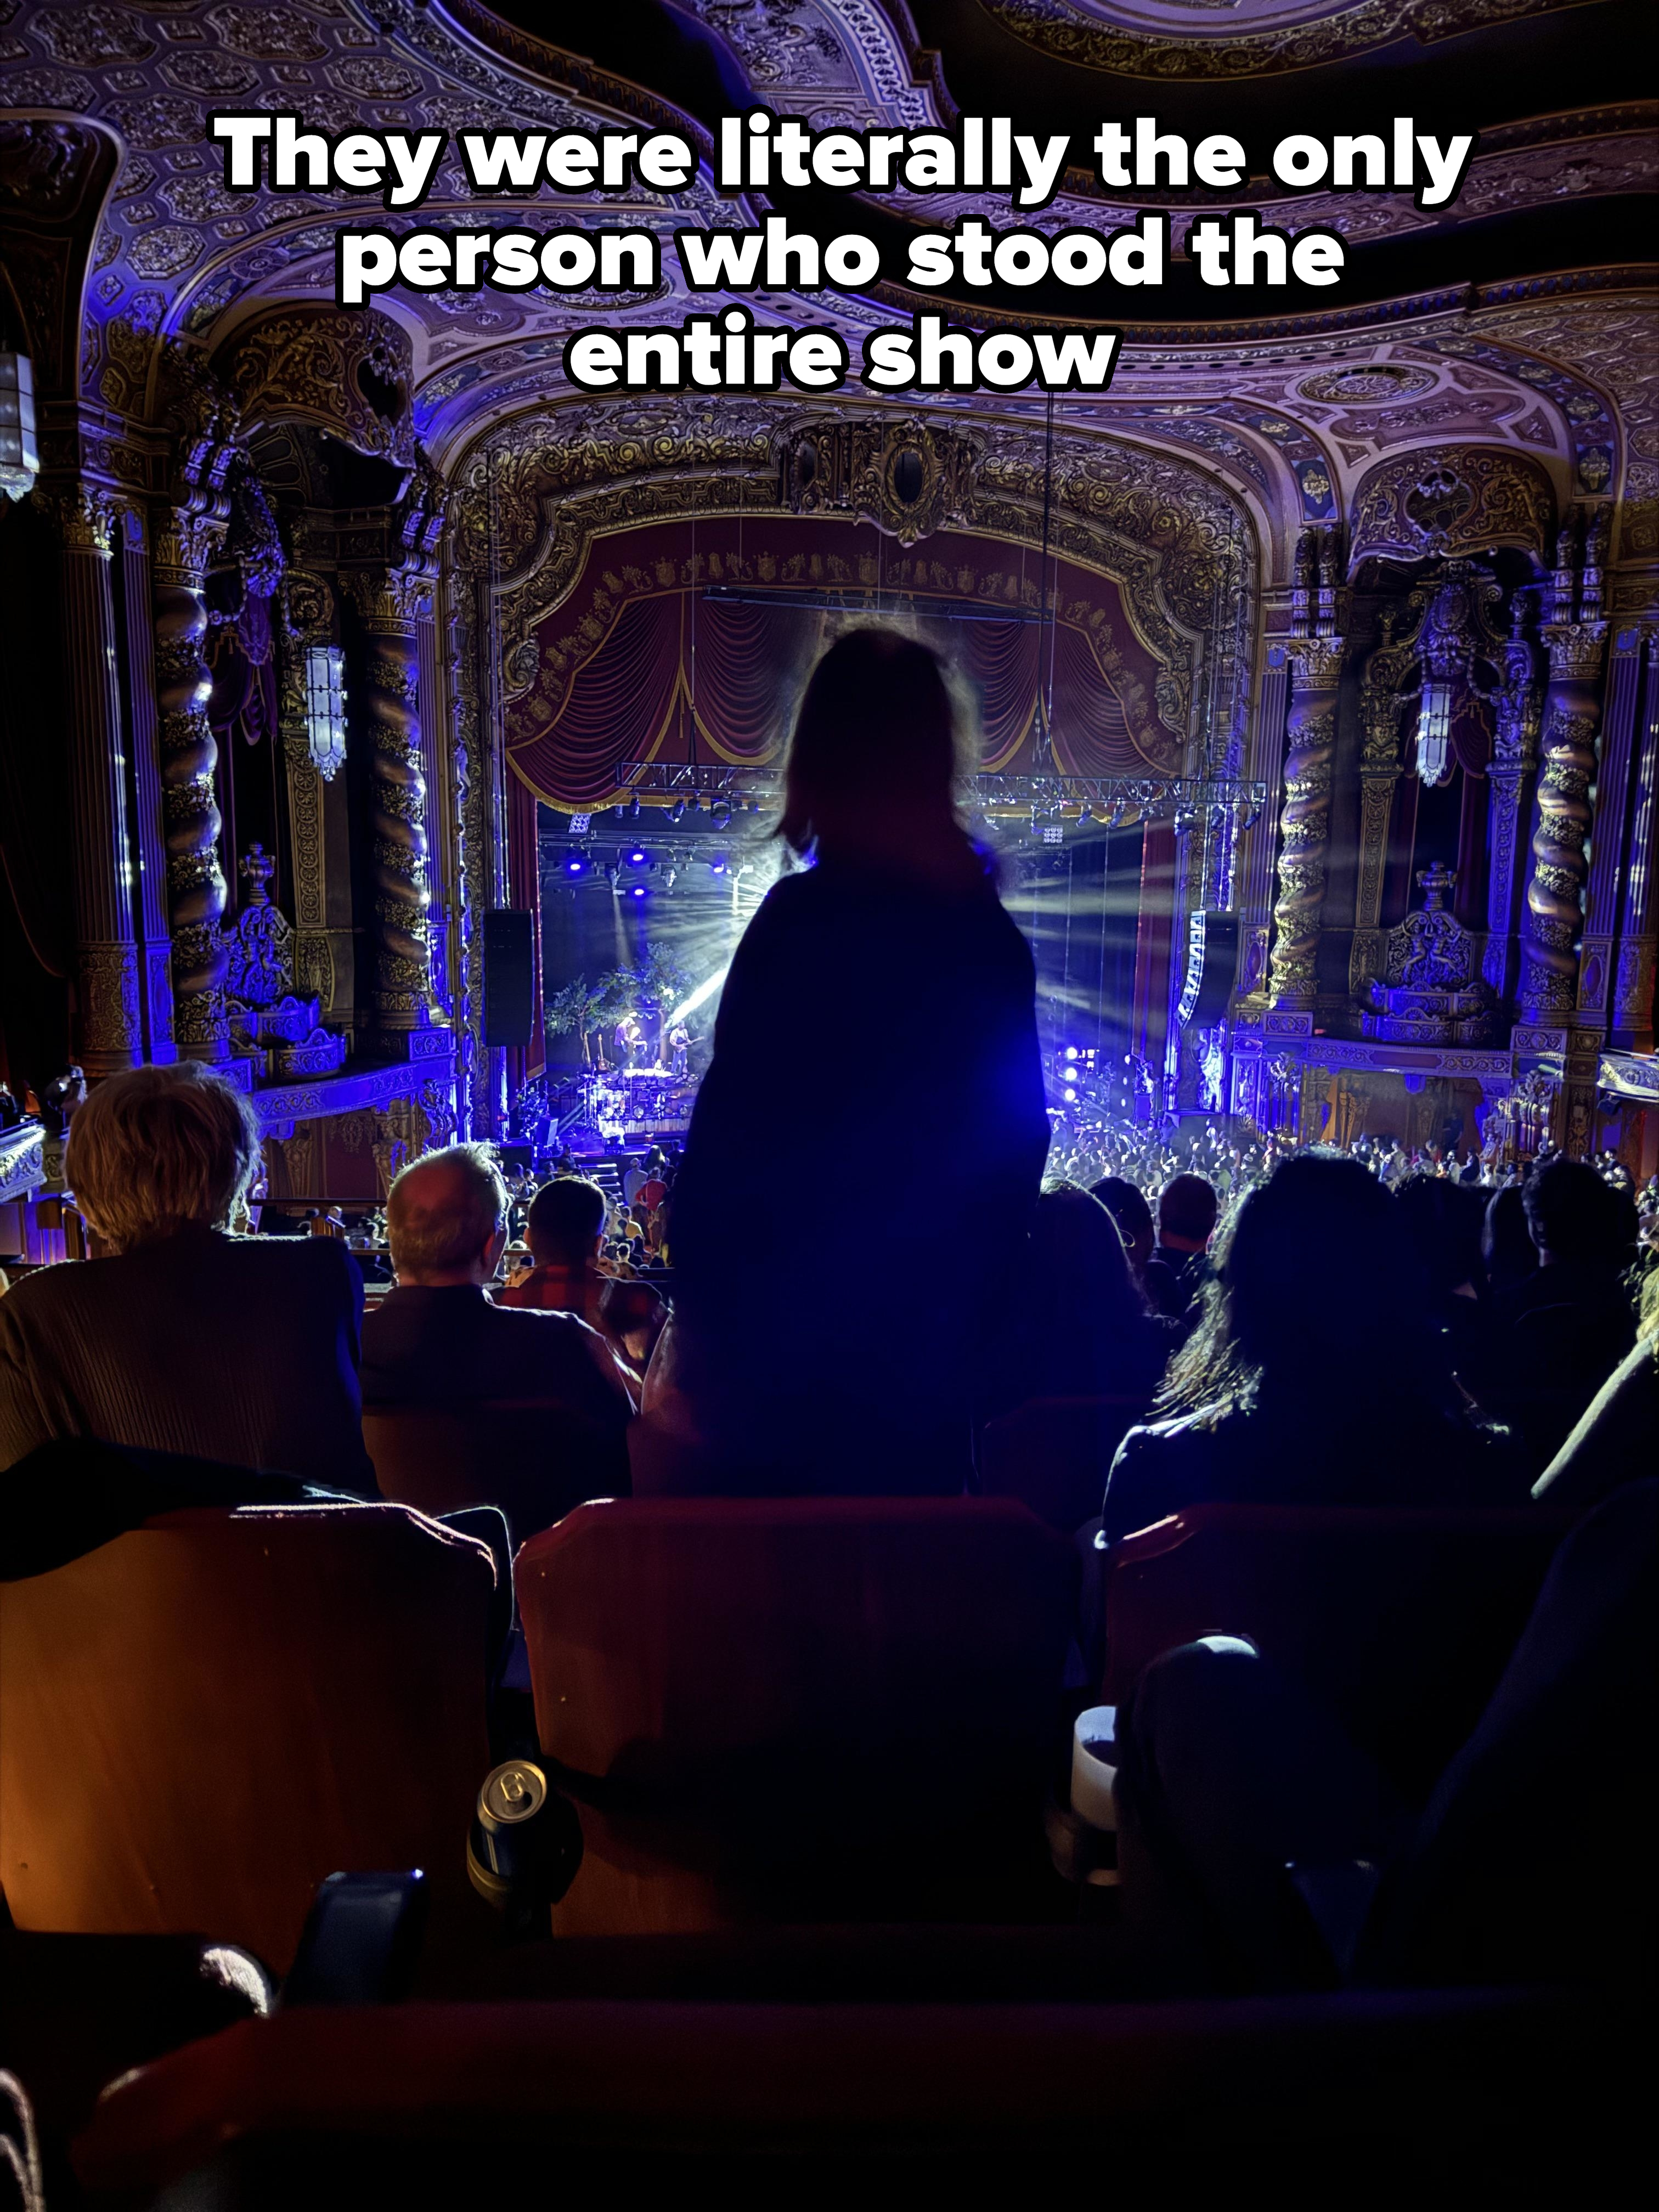 Audience view from balcony seats at a live theater performance, with focus on stage and silhouettes of attendees